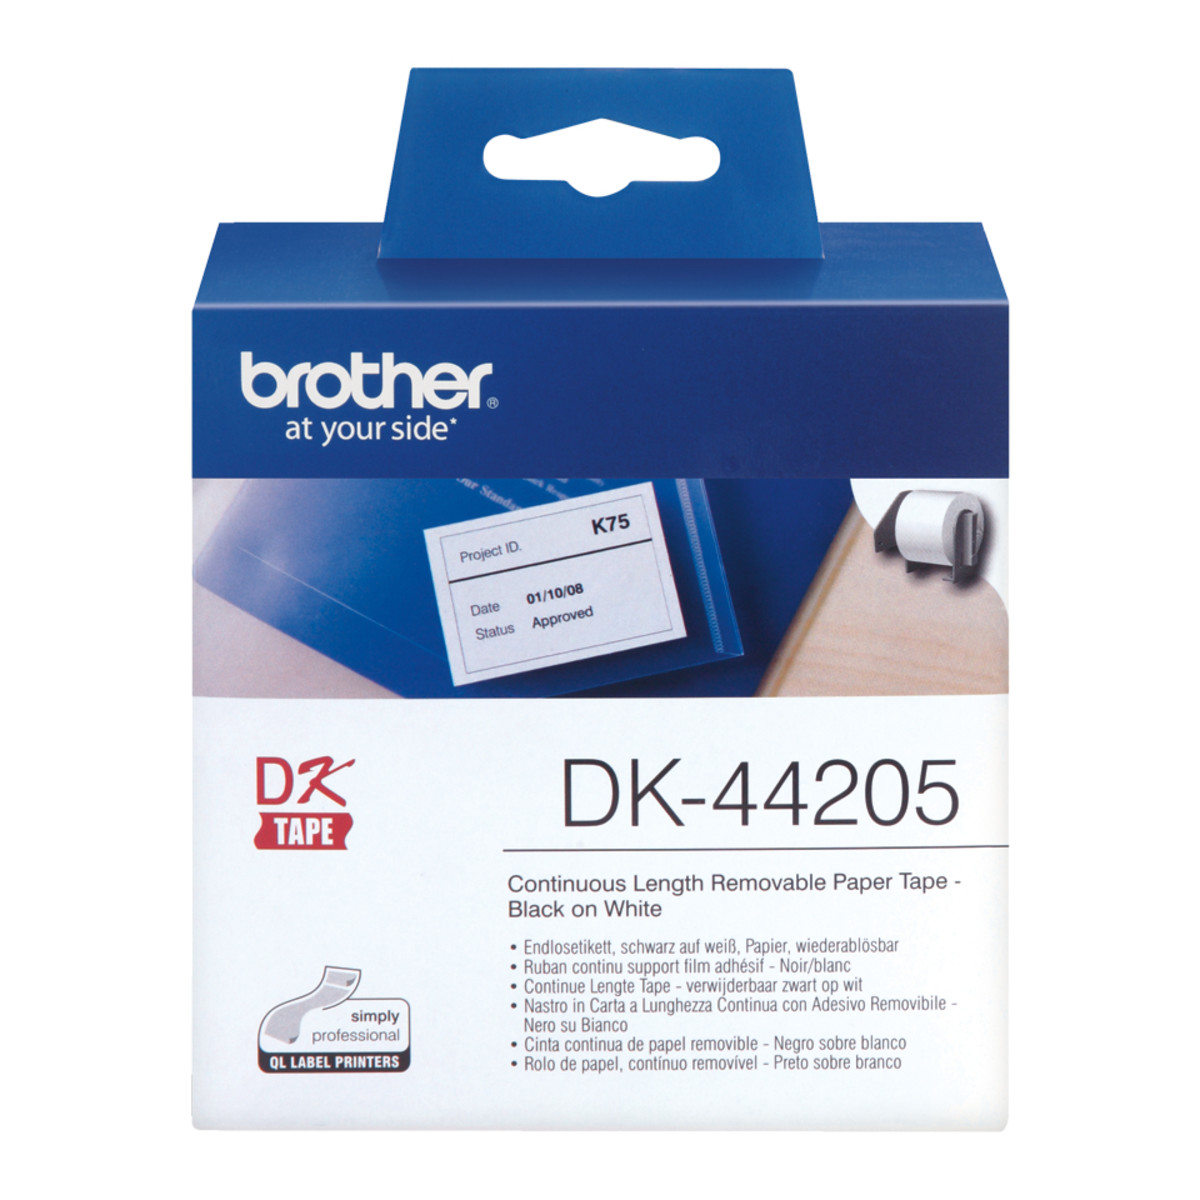 DK44205 Continuous Removable Paper Roll